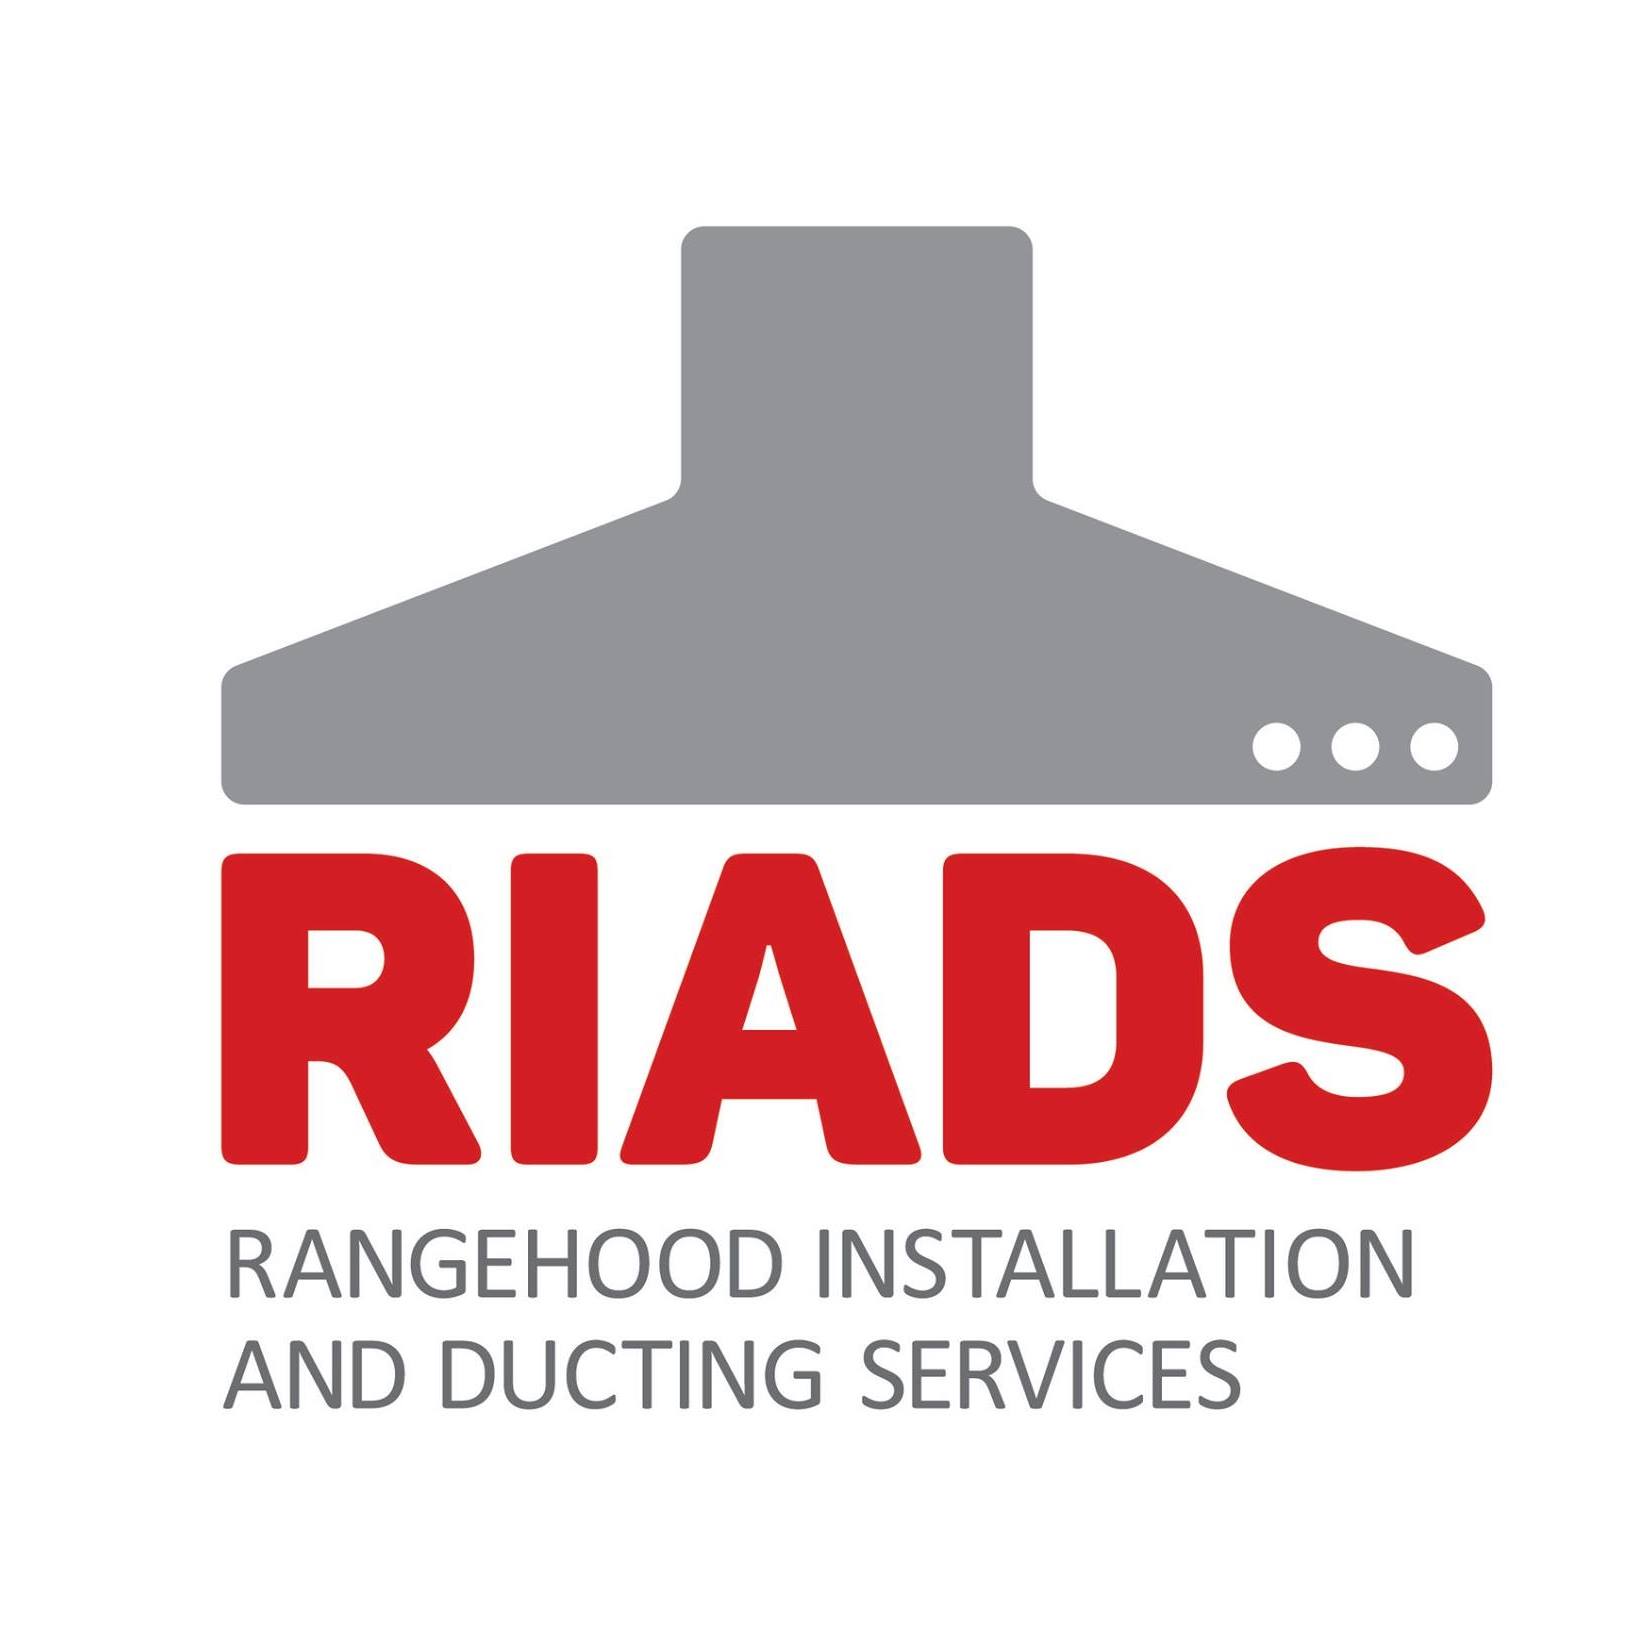 Rangehood Installation and Ducting Services Pty Ltd